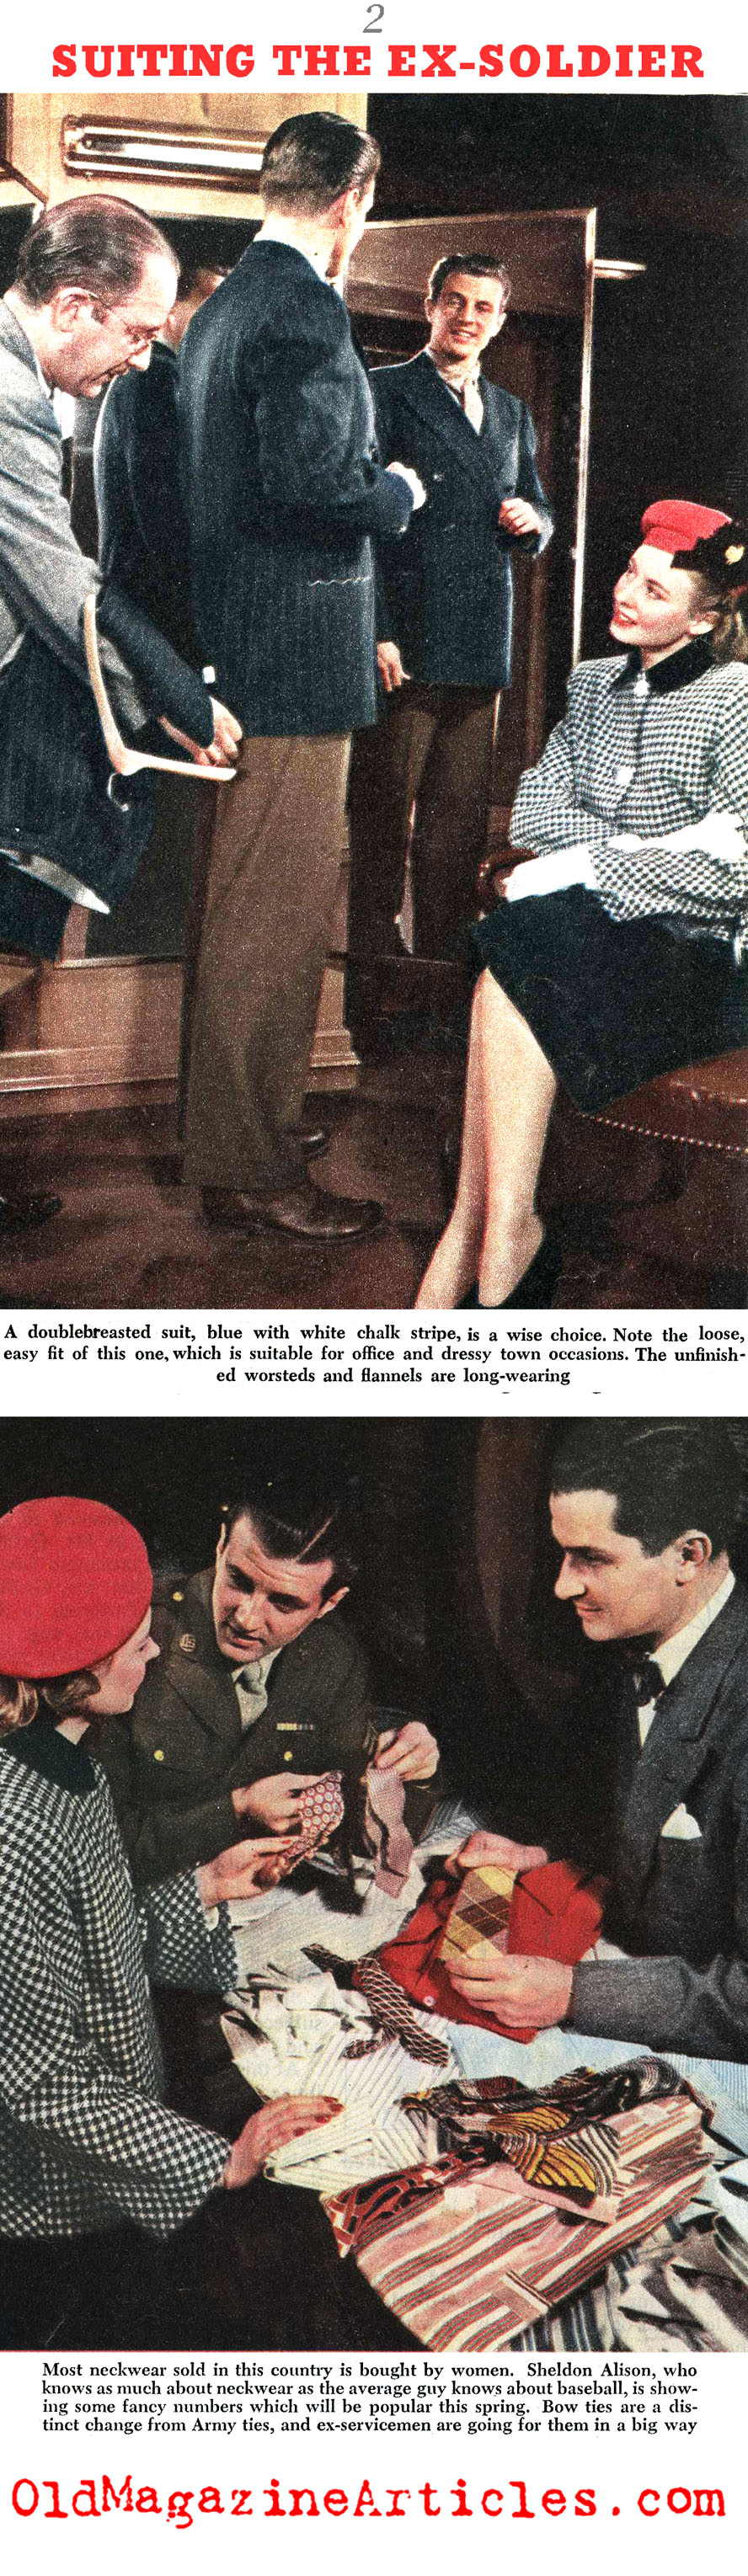 The Ex-Soldier-Goes Shopping (Collier's Magazine, 1945)